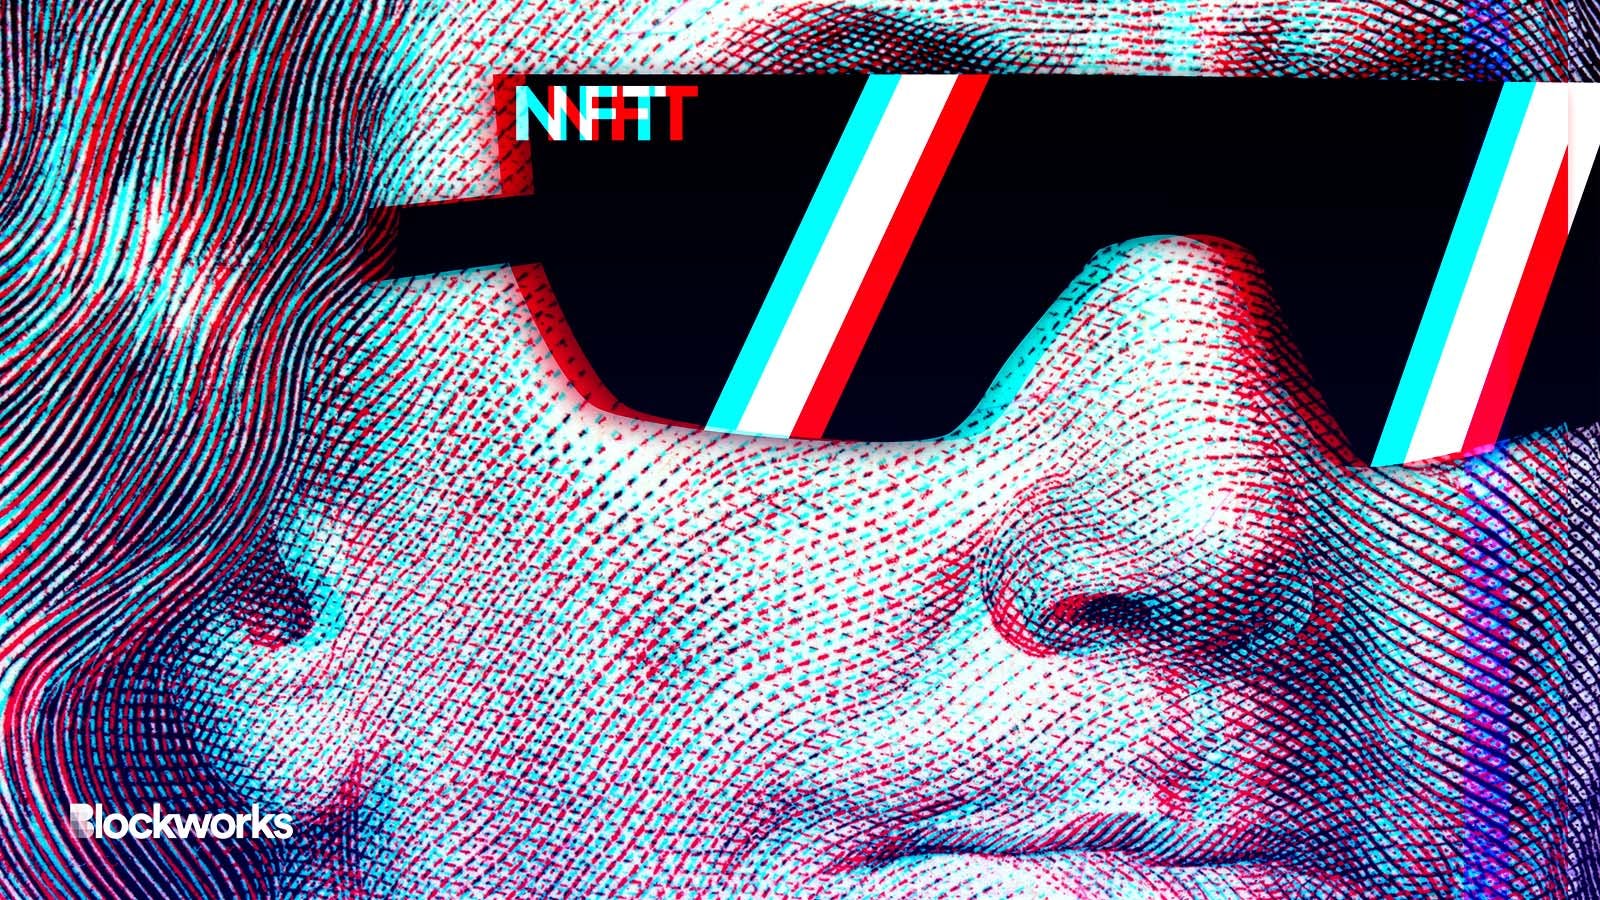 So you know what NFTs are, but what about xNFTs?